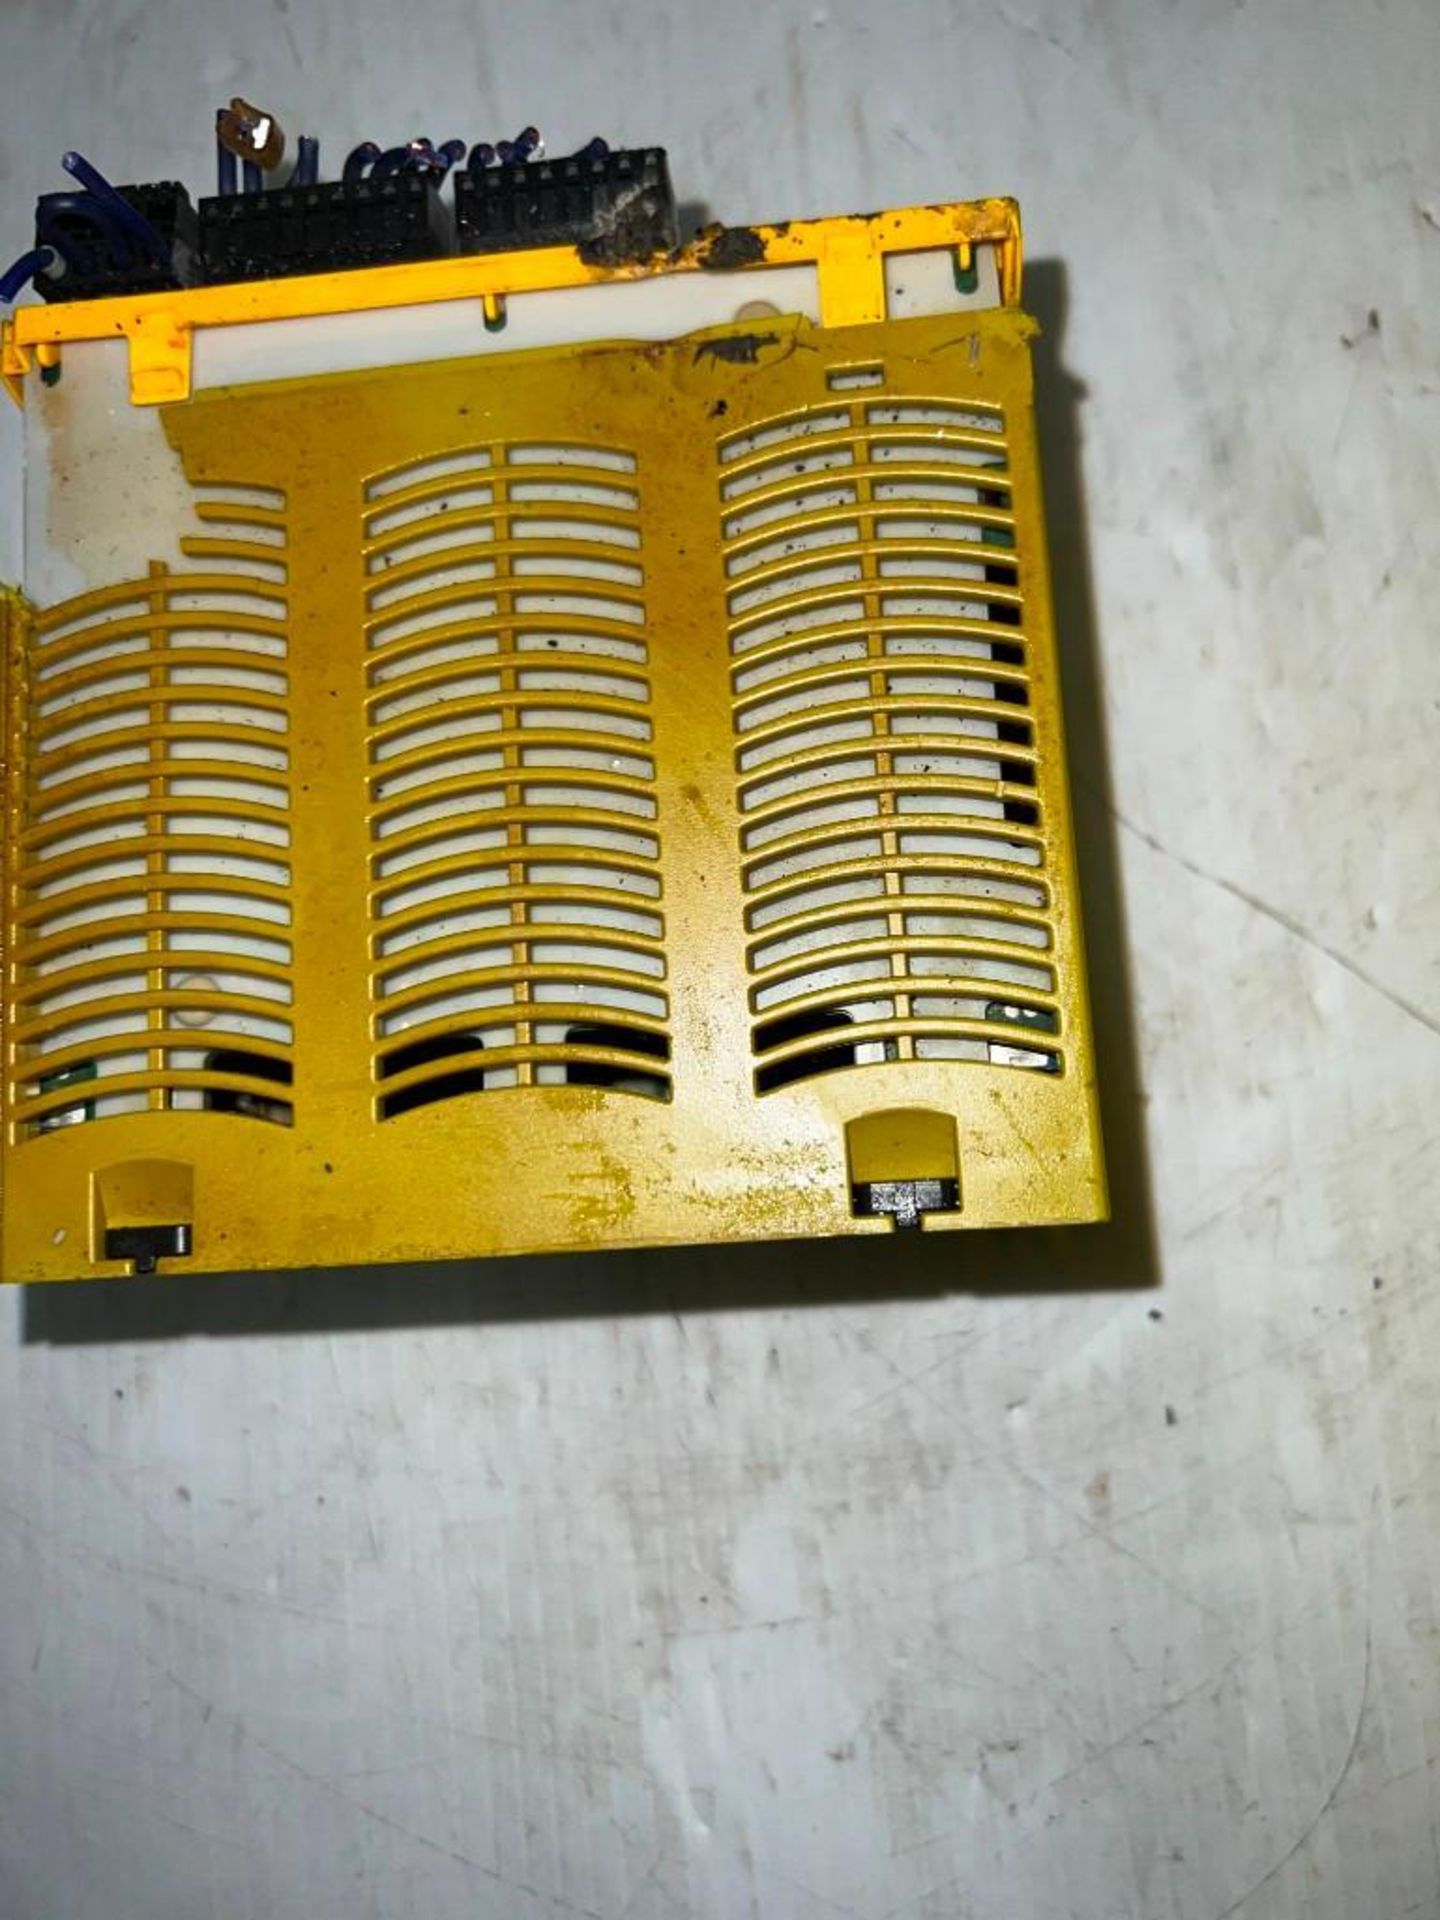 Lot of Pilz Modules (Some have a broken casing) - Image 7 of 9